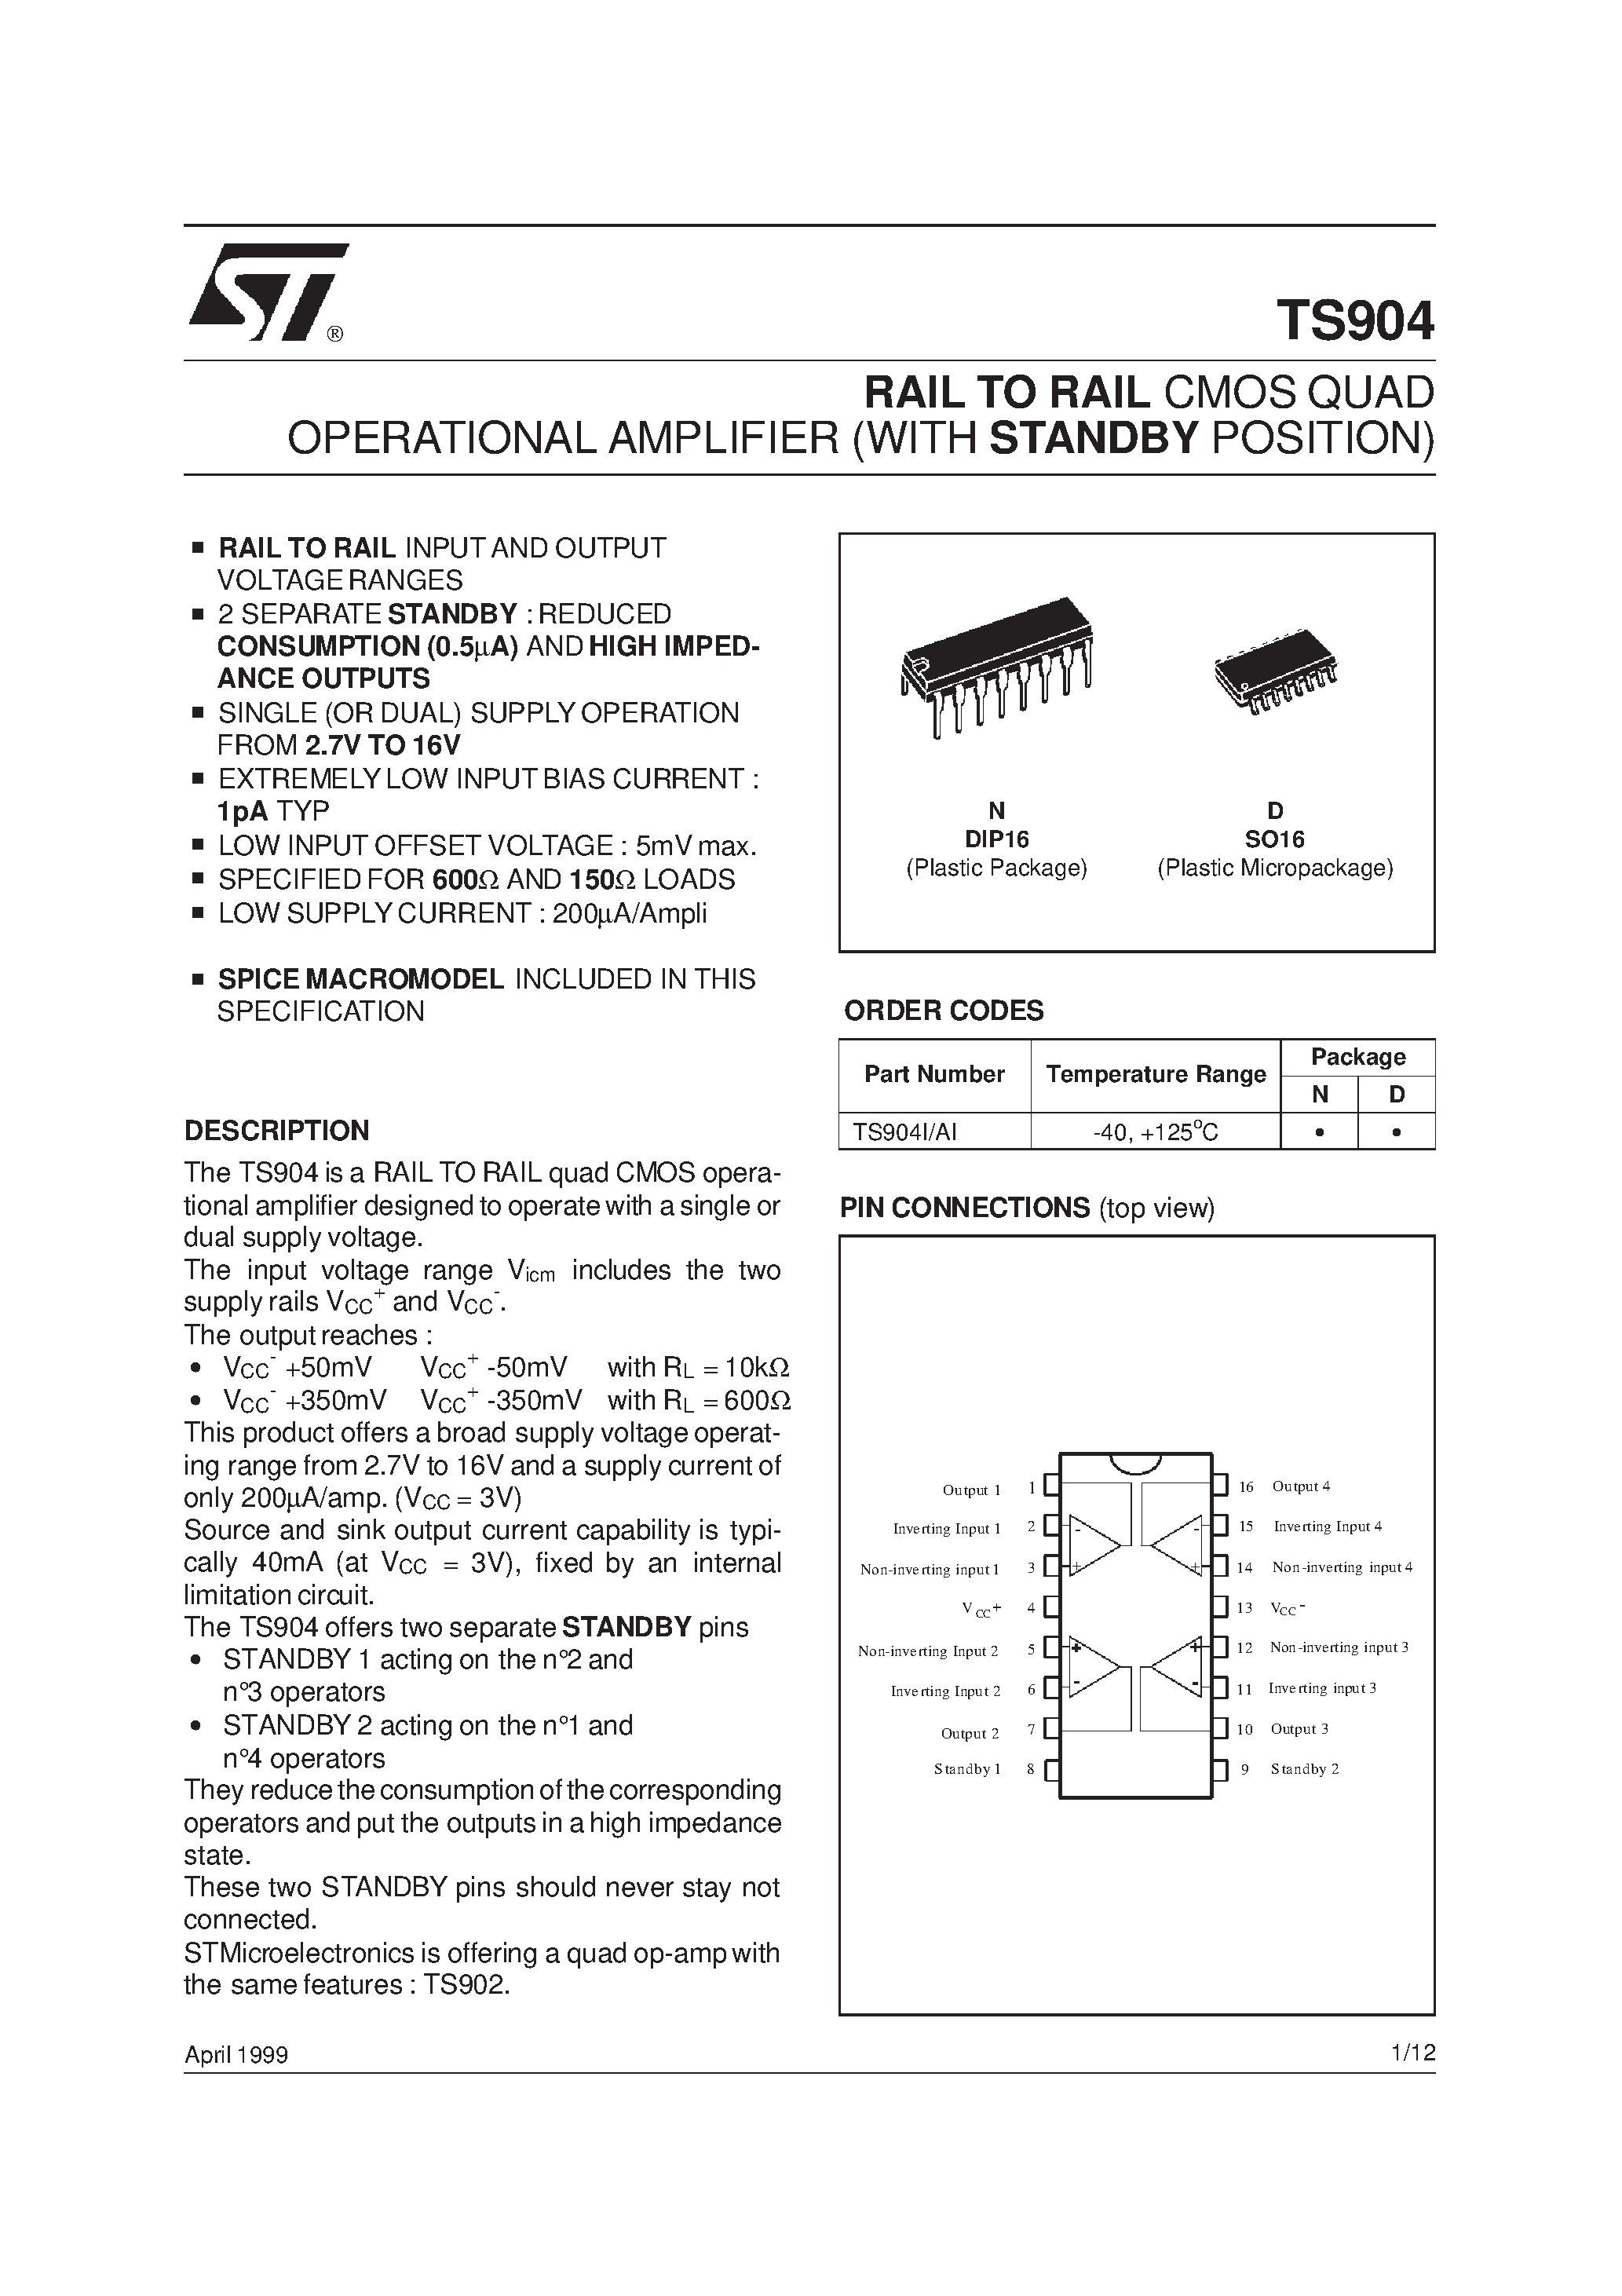 Datasheet TS904 - RAIL TO RAIL CMOS QUAD OPERATIONAL AMPLIFIER WITH STANDBY POSITION page 1